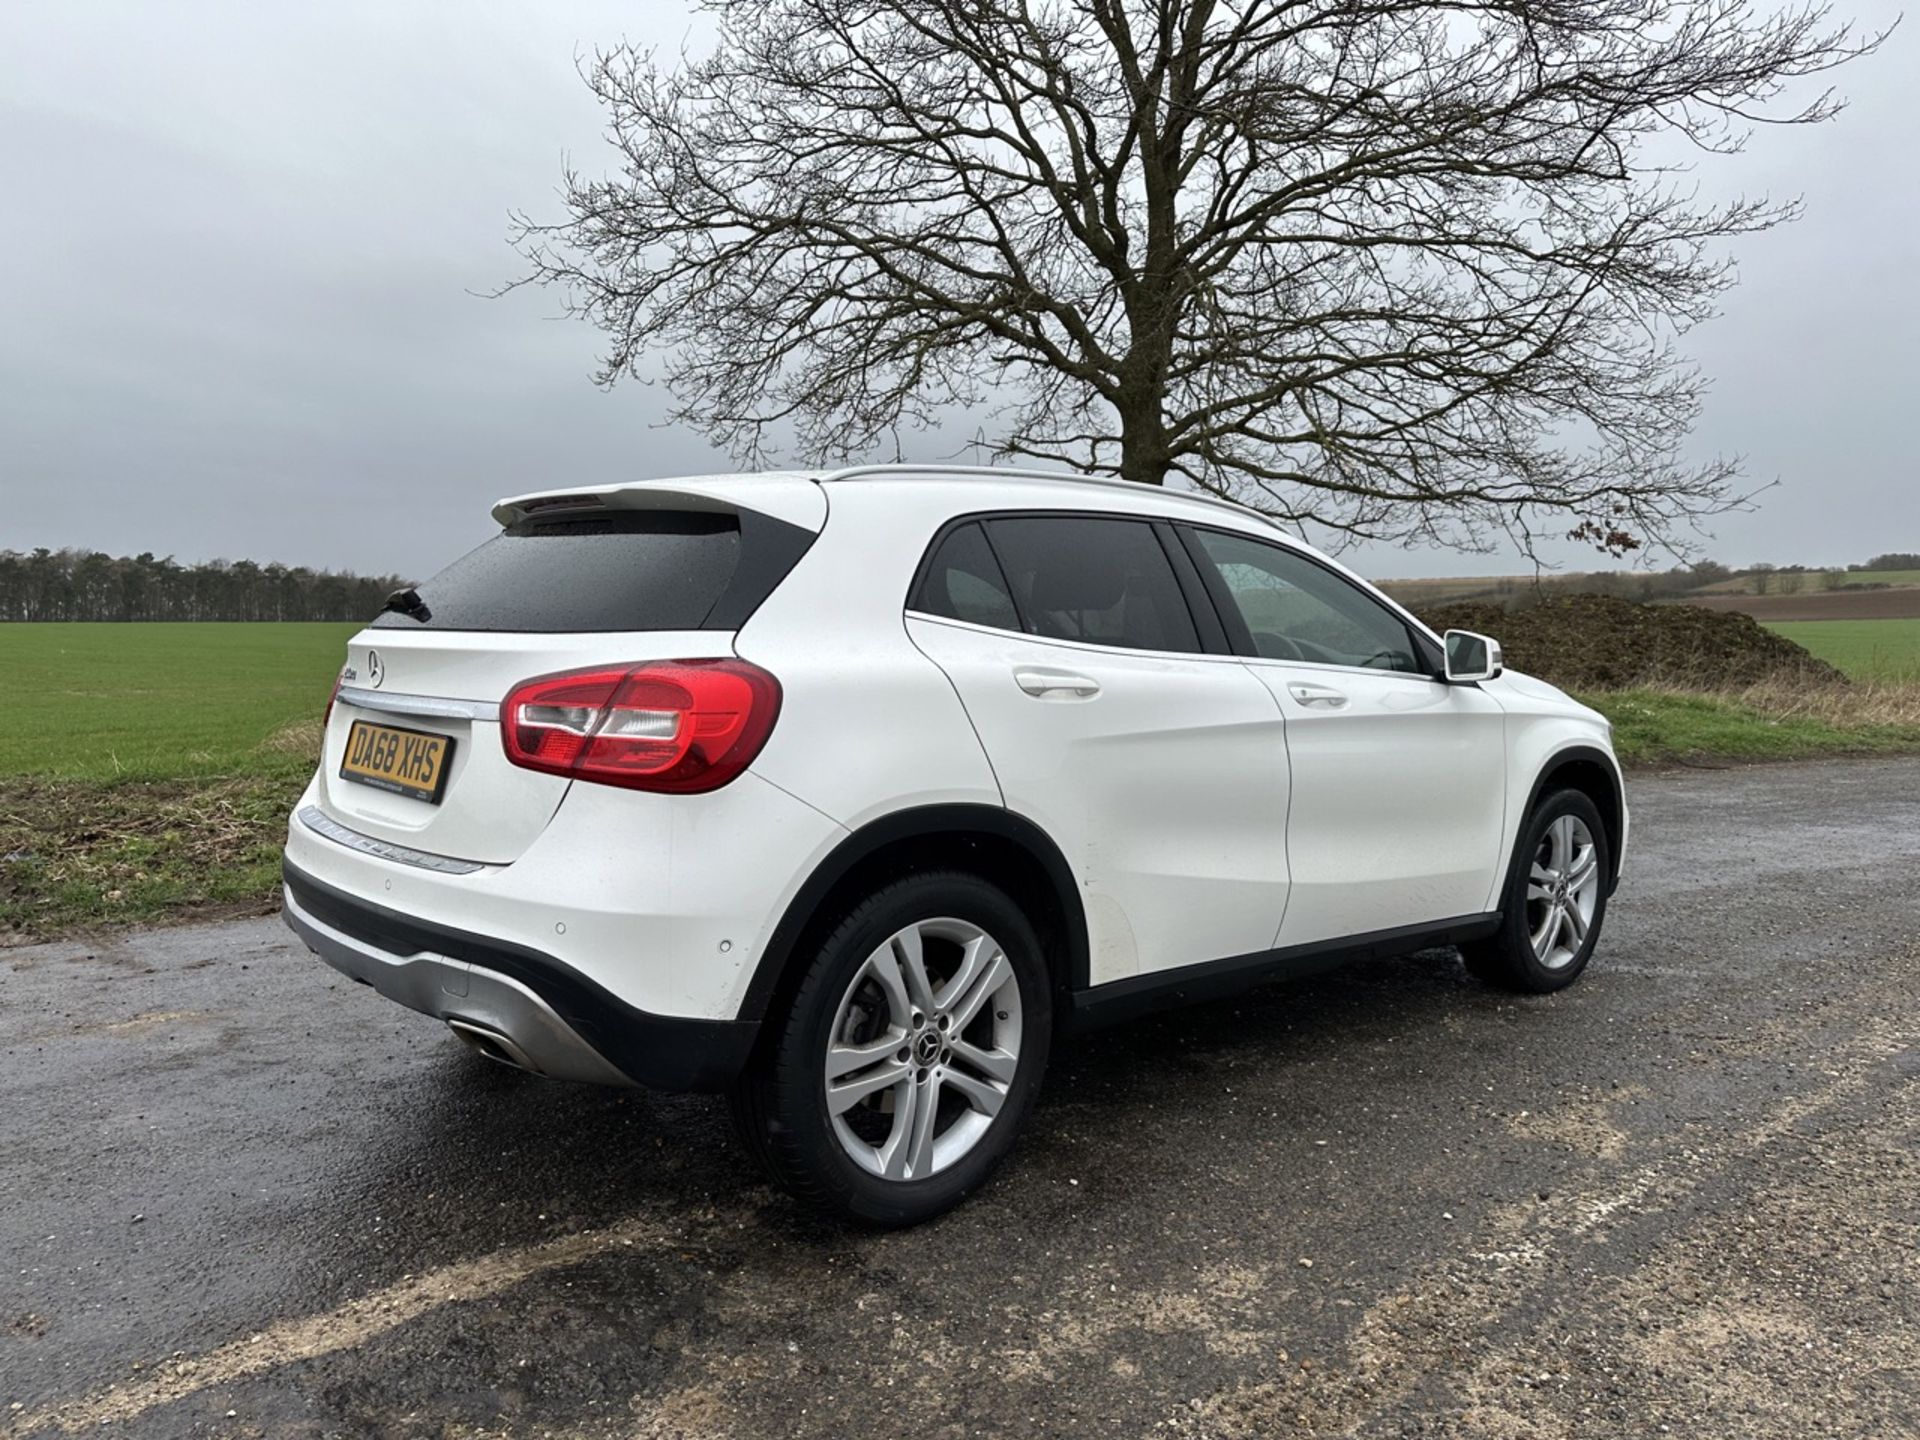 MERCEDES GLA 200d AUTO "SPORT EXECUTIVE" 2019 MODEL - LEATHER - LOW MILES - AIR CON - Image 8 of 17